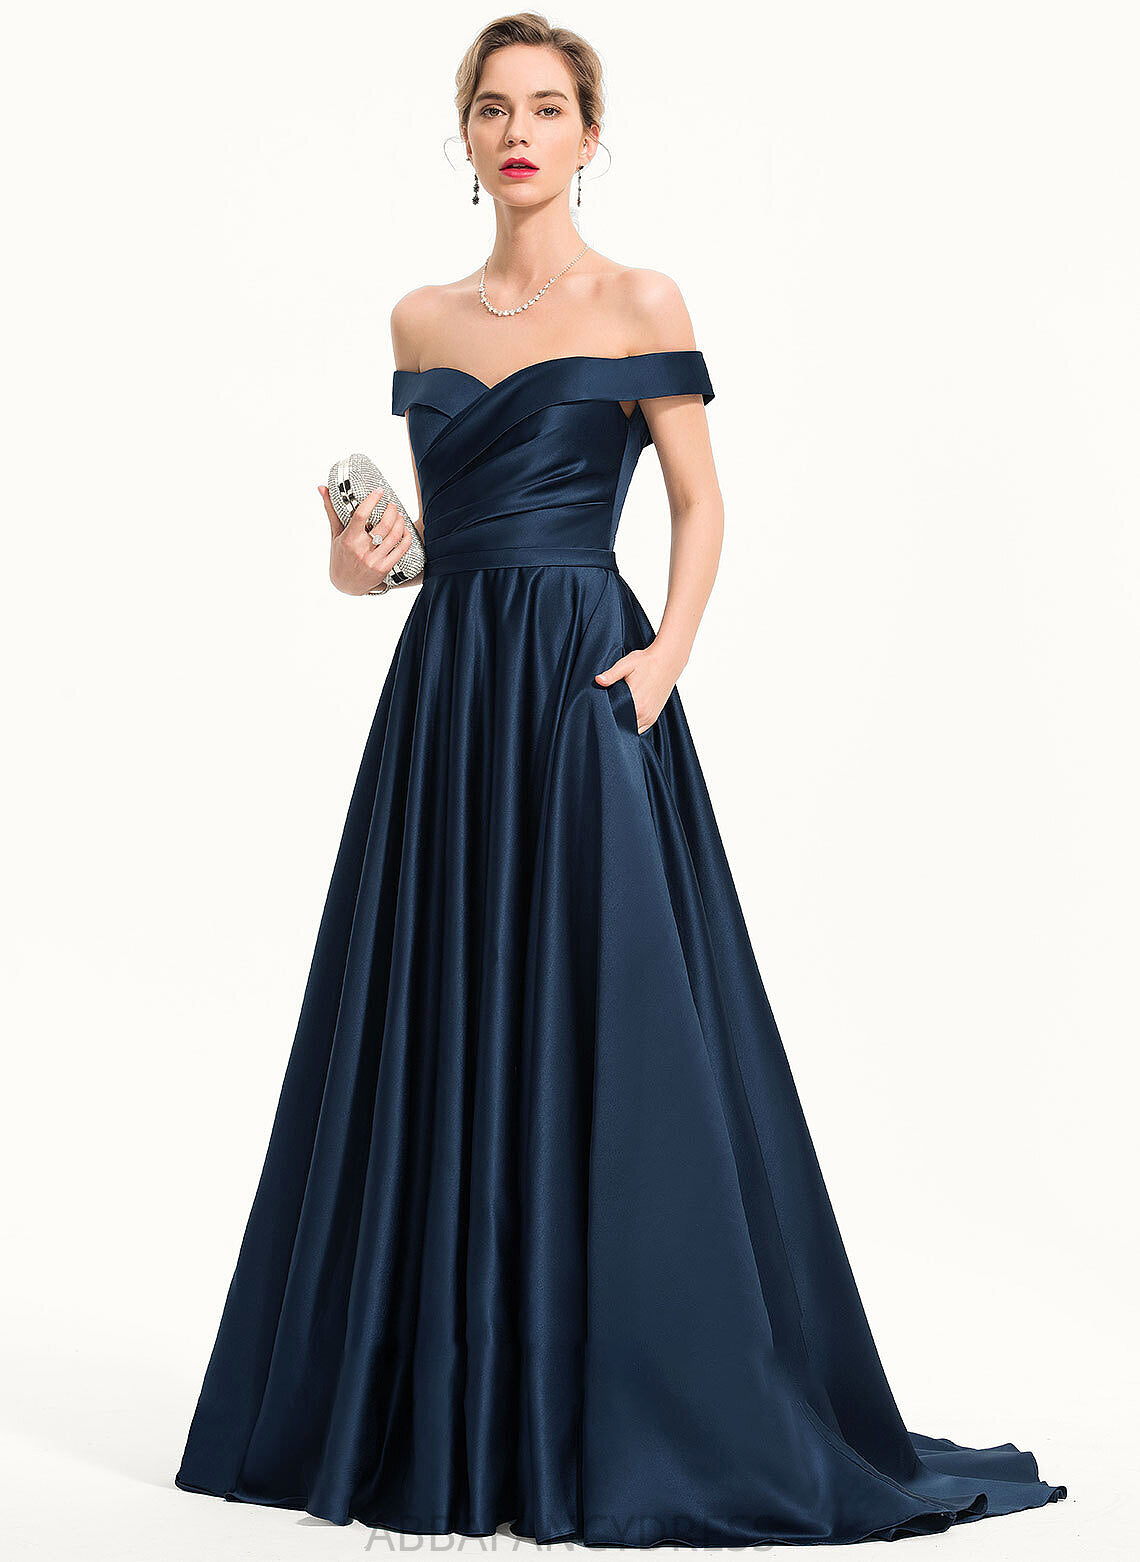 With Prom Dresses Pockets Train Sweep A-Line Off-the-Shoulder Satin Juliana